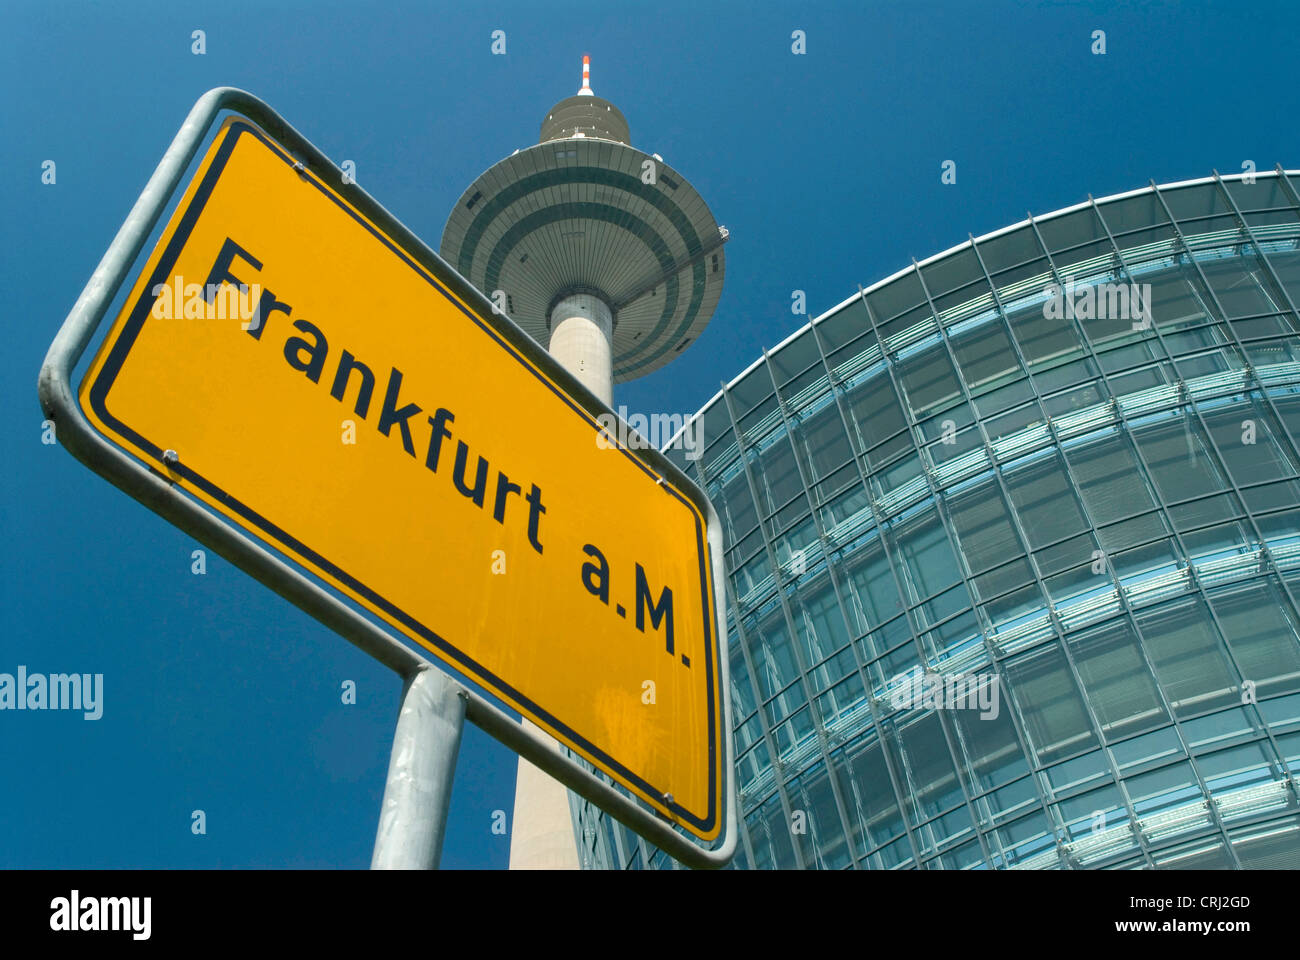 TV-Tower with city sign, Germany, Hesse, Frankfurt am Main Stock Photo